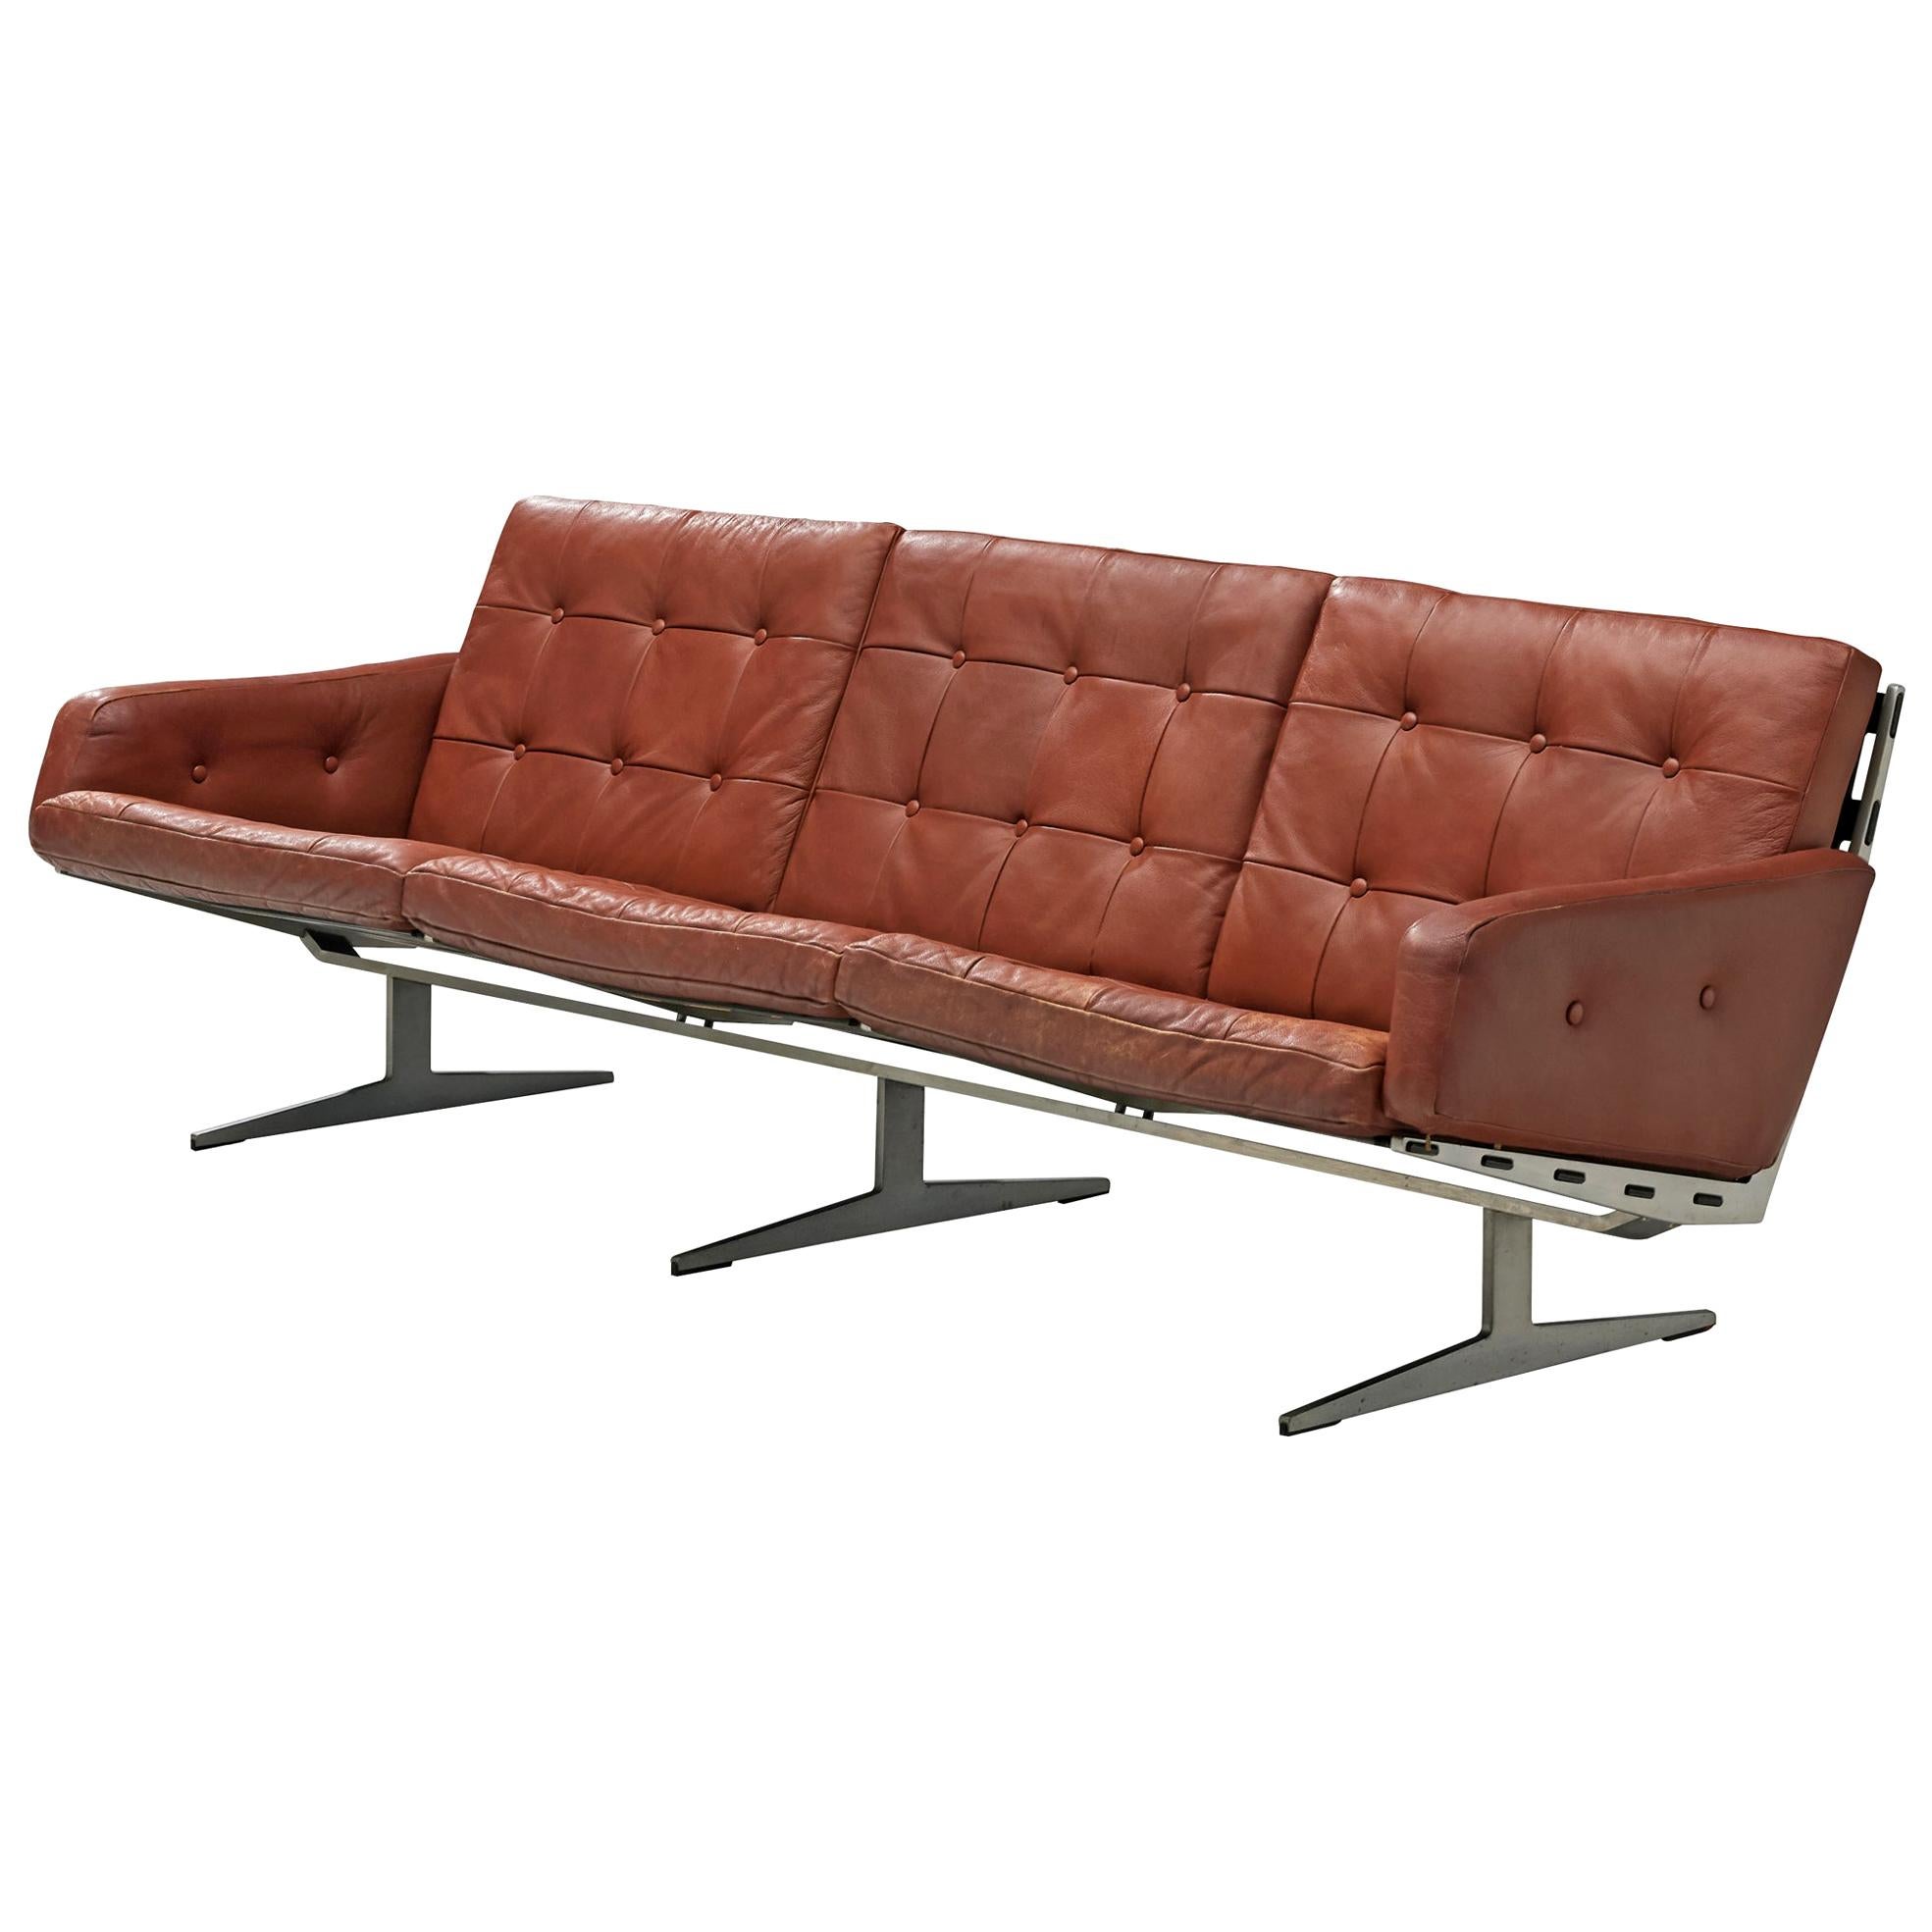 Sofa "Caravelle" in Brown Leather by Paul Leidersdorff